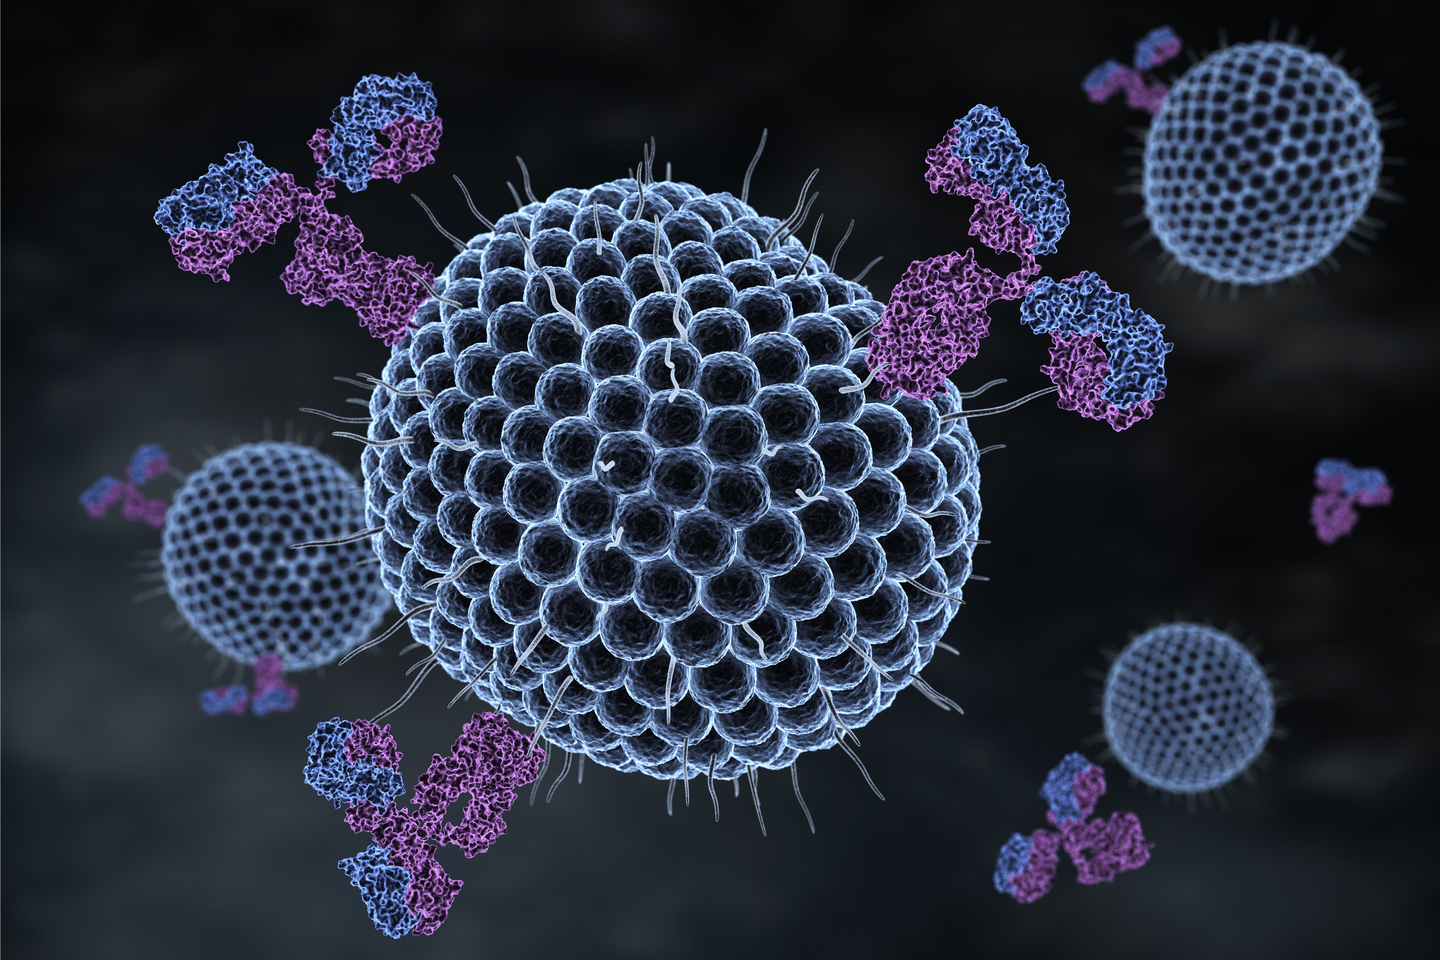 FDA Approves Expansion of Shingrix for Prevention of Herpes Zoster in Immunocompromised Adults